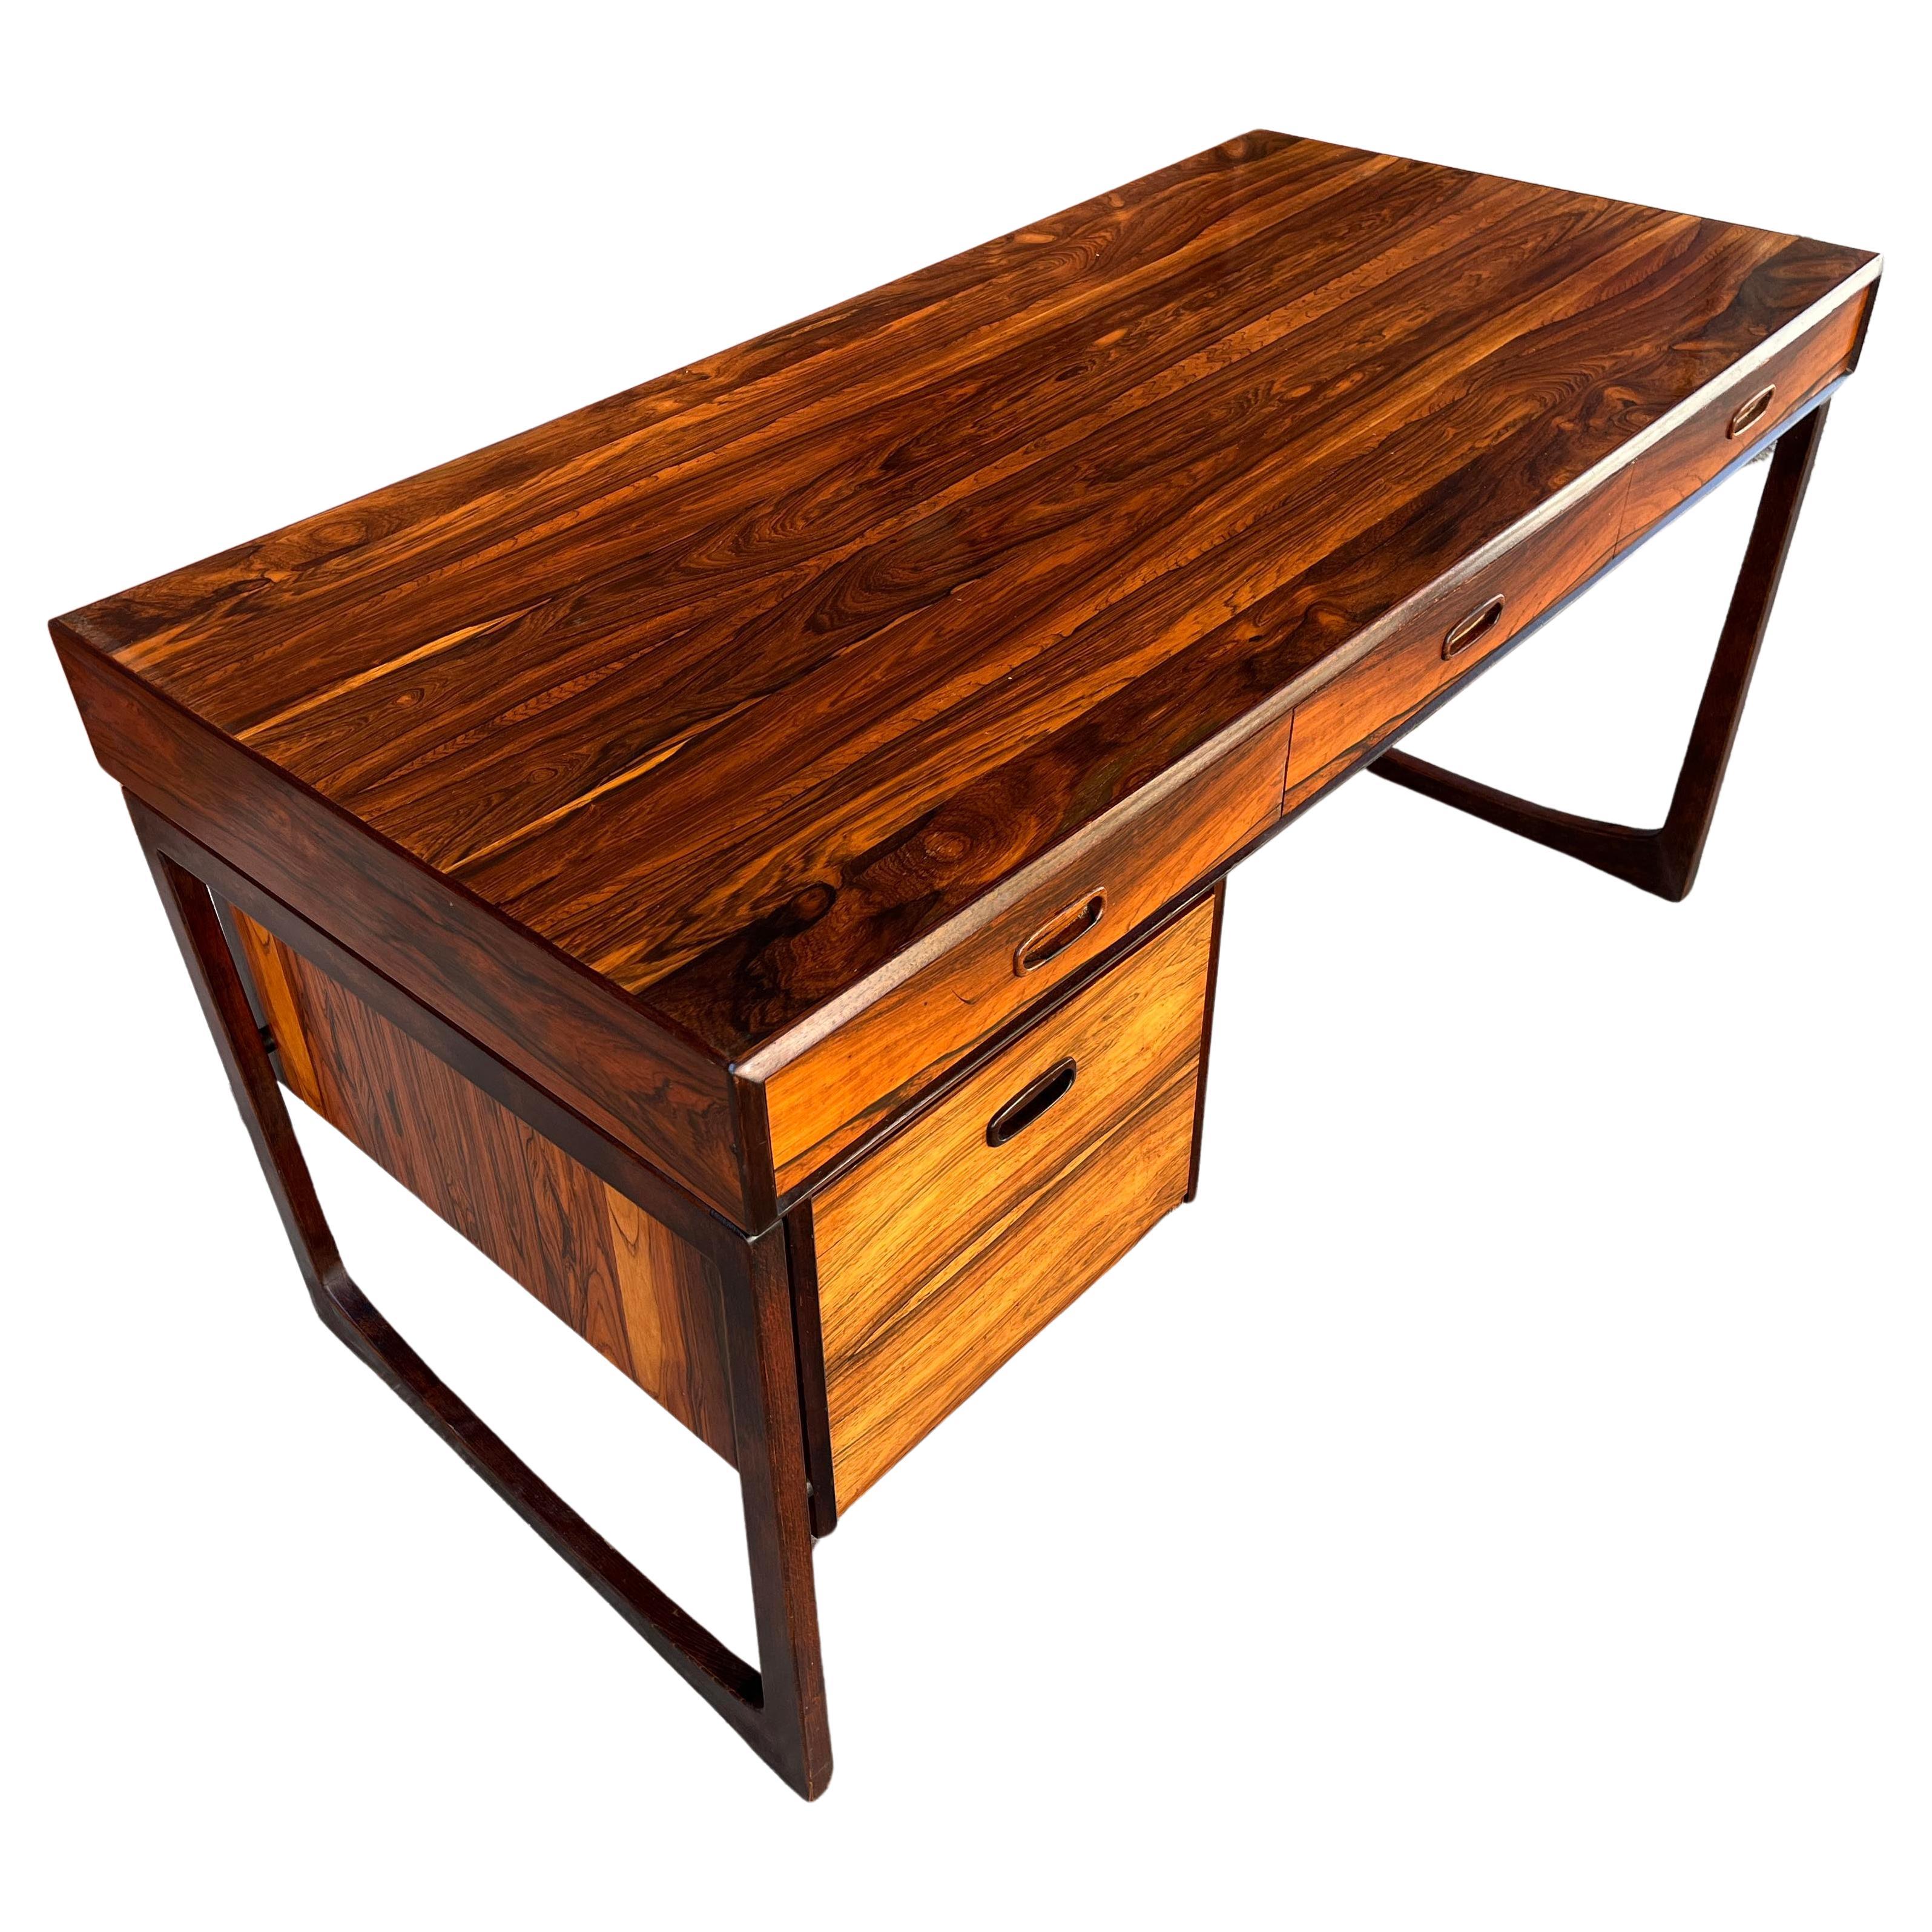 Stunning 1970s modern rosewood desk by Ganddal Mobelfabrik, in vintage original condition. Rich, vibrant tone and grain with intense color and contrast. Floating top and finished back with built-in book shelf. Fine vintage condition with all